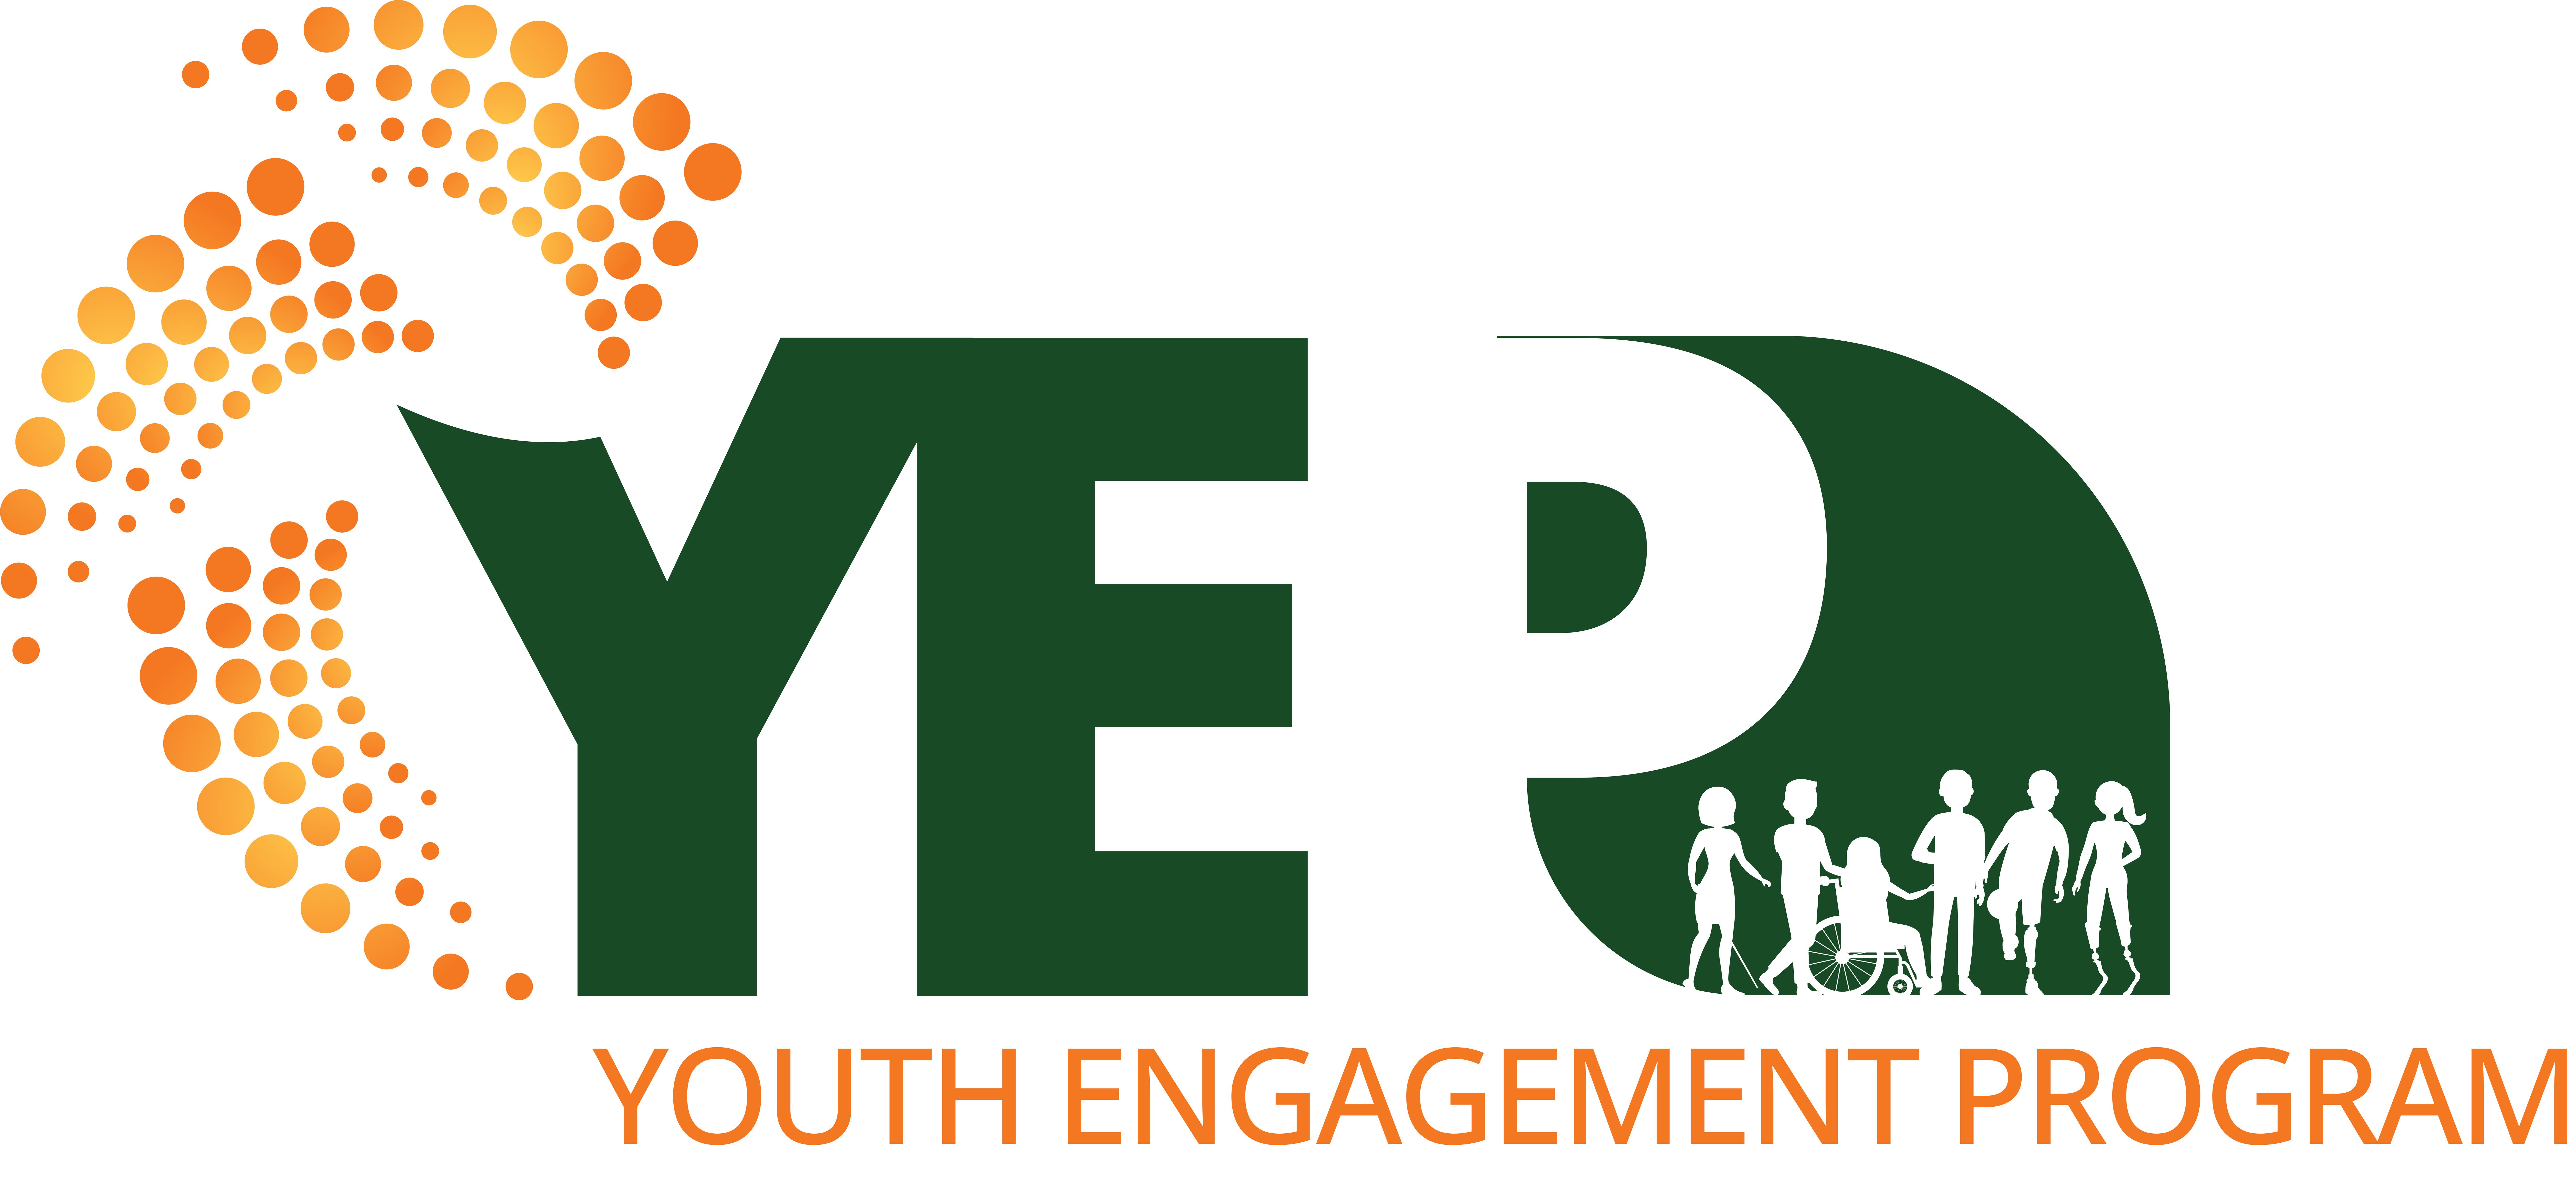 Press Release: The Amputee Coalition Launches a New Youth Engagement Program